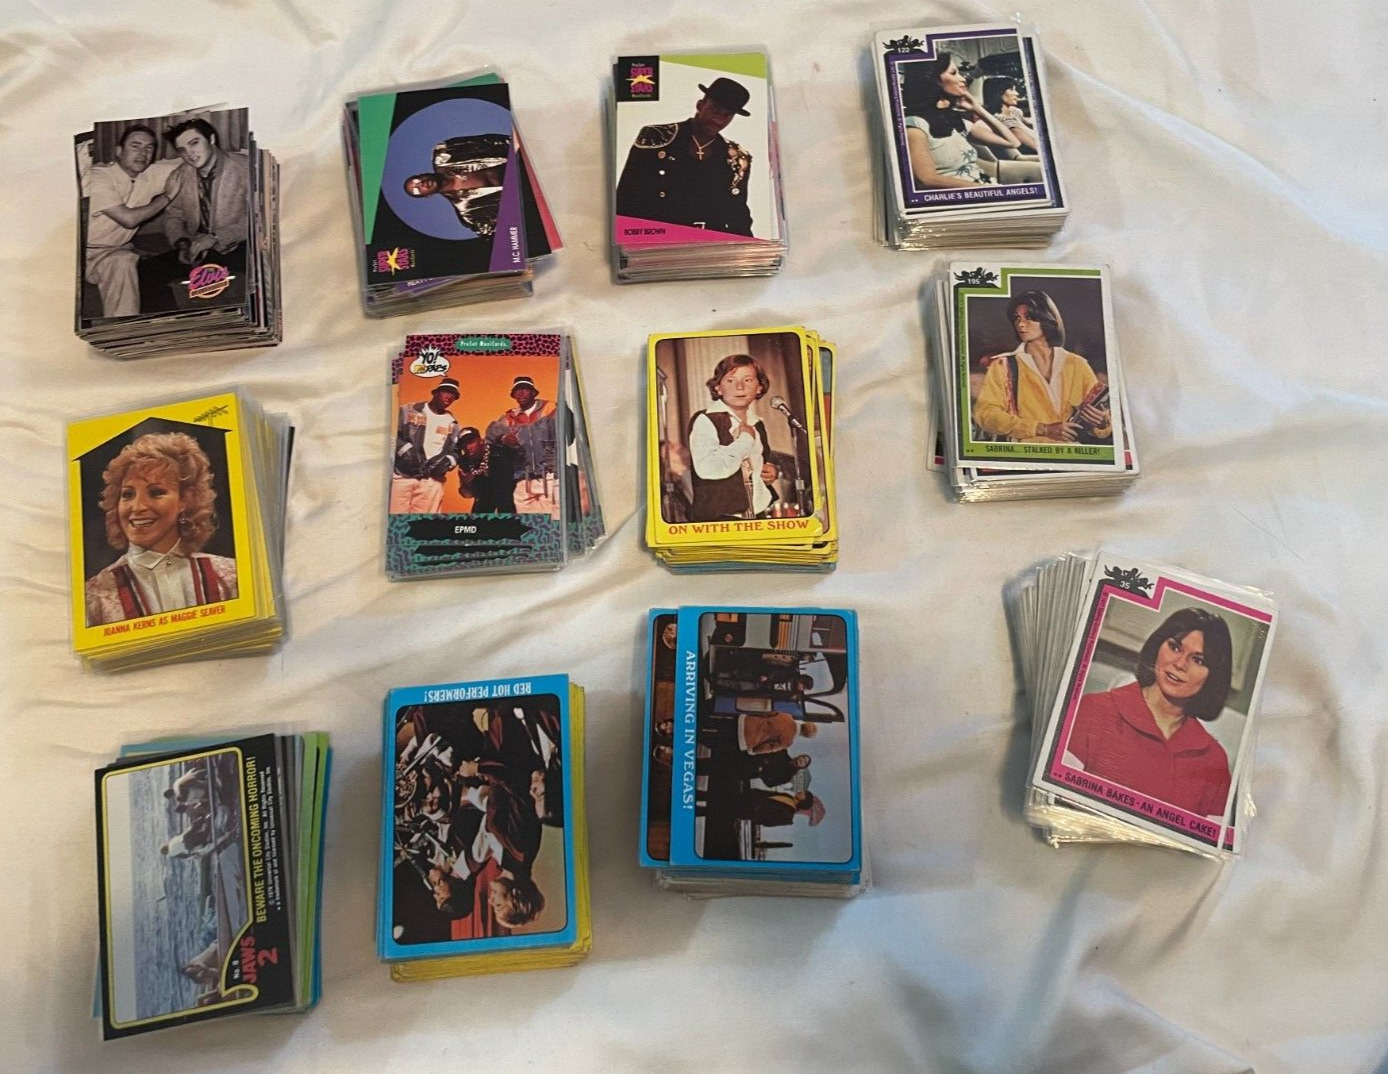 645 Mixed lot of trading cards Charlies angels, jaws2, MTV, elvis, Growing pains